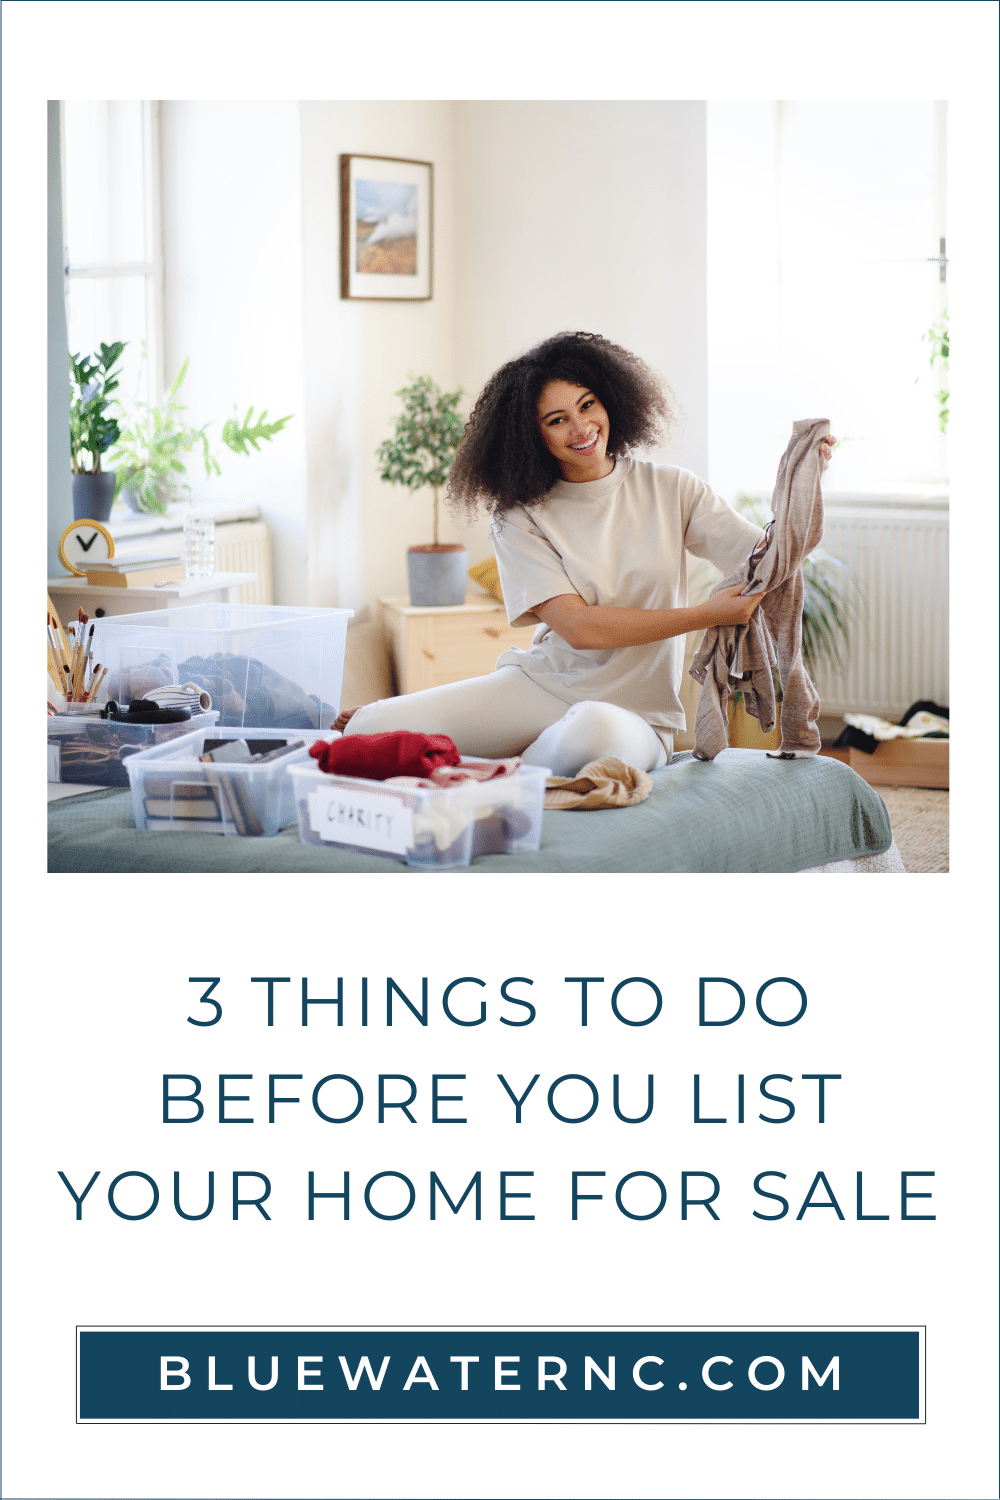 Save these 3 tips on what to do before you list your home